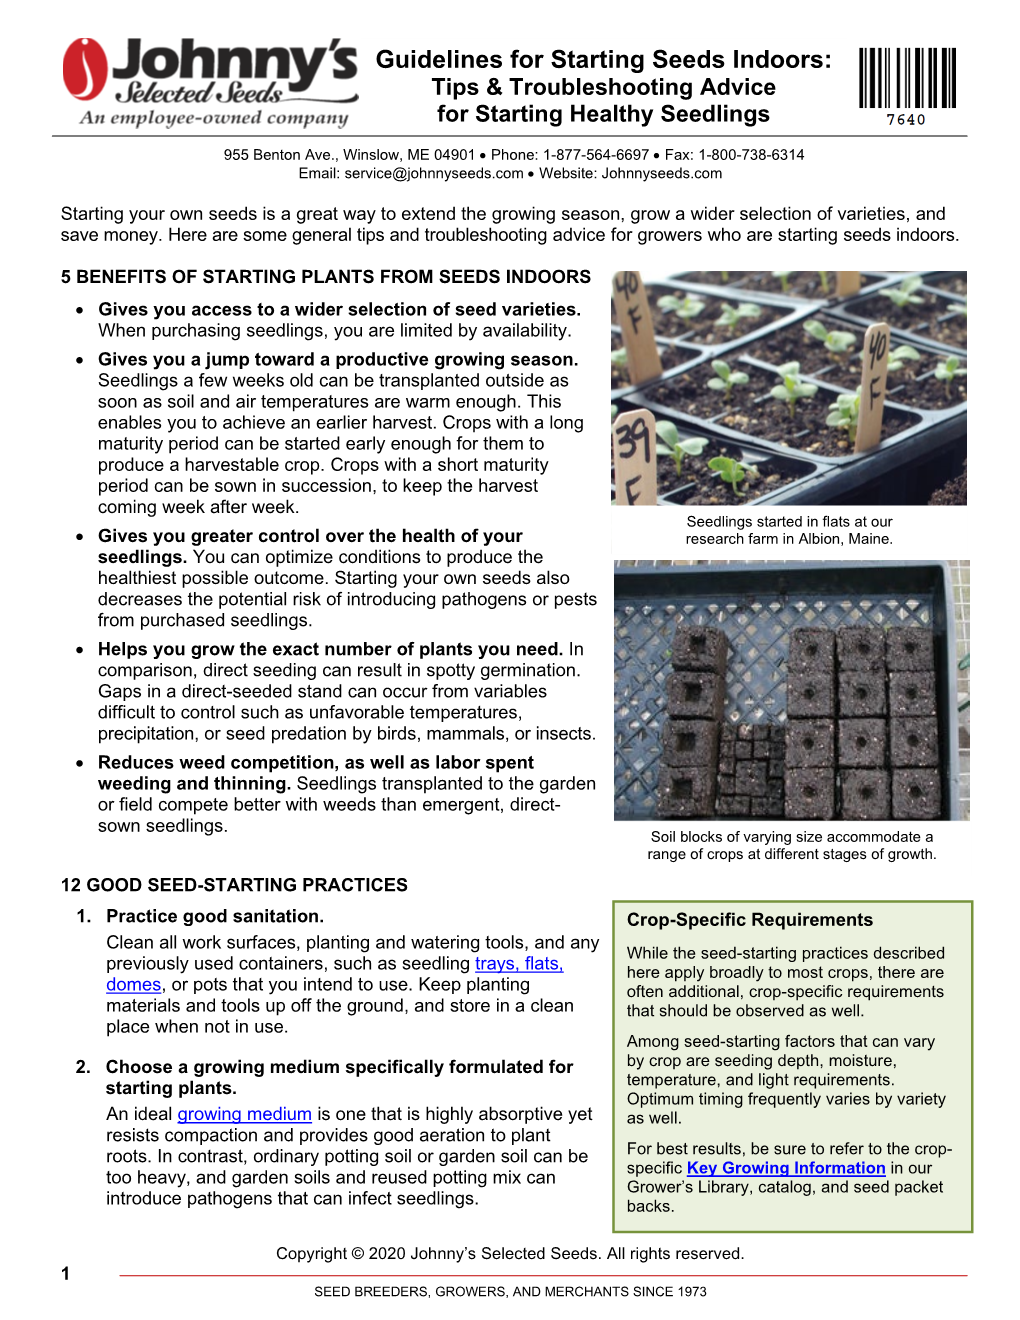 Guidelines for Starting Seeds Indoors: Tips & Troubleshooting Advice for Starting Healthy Seedlings